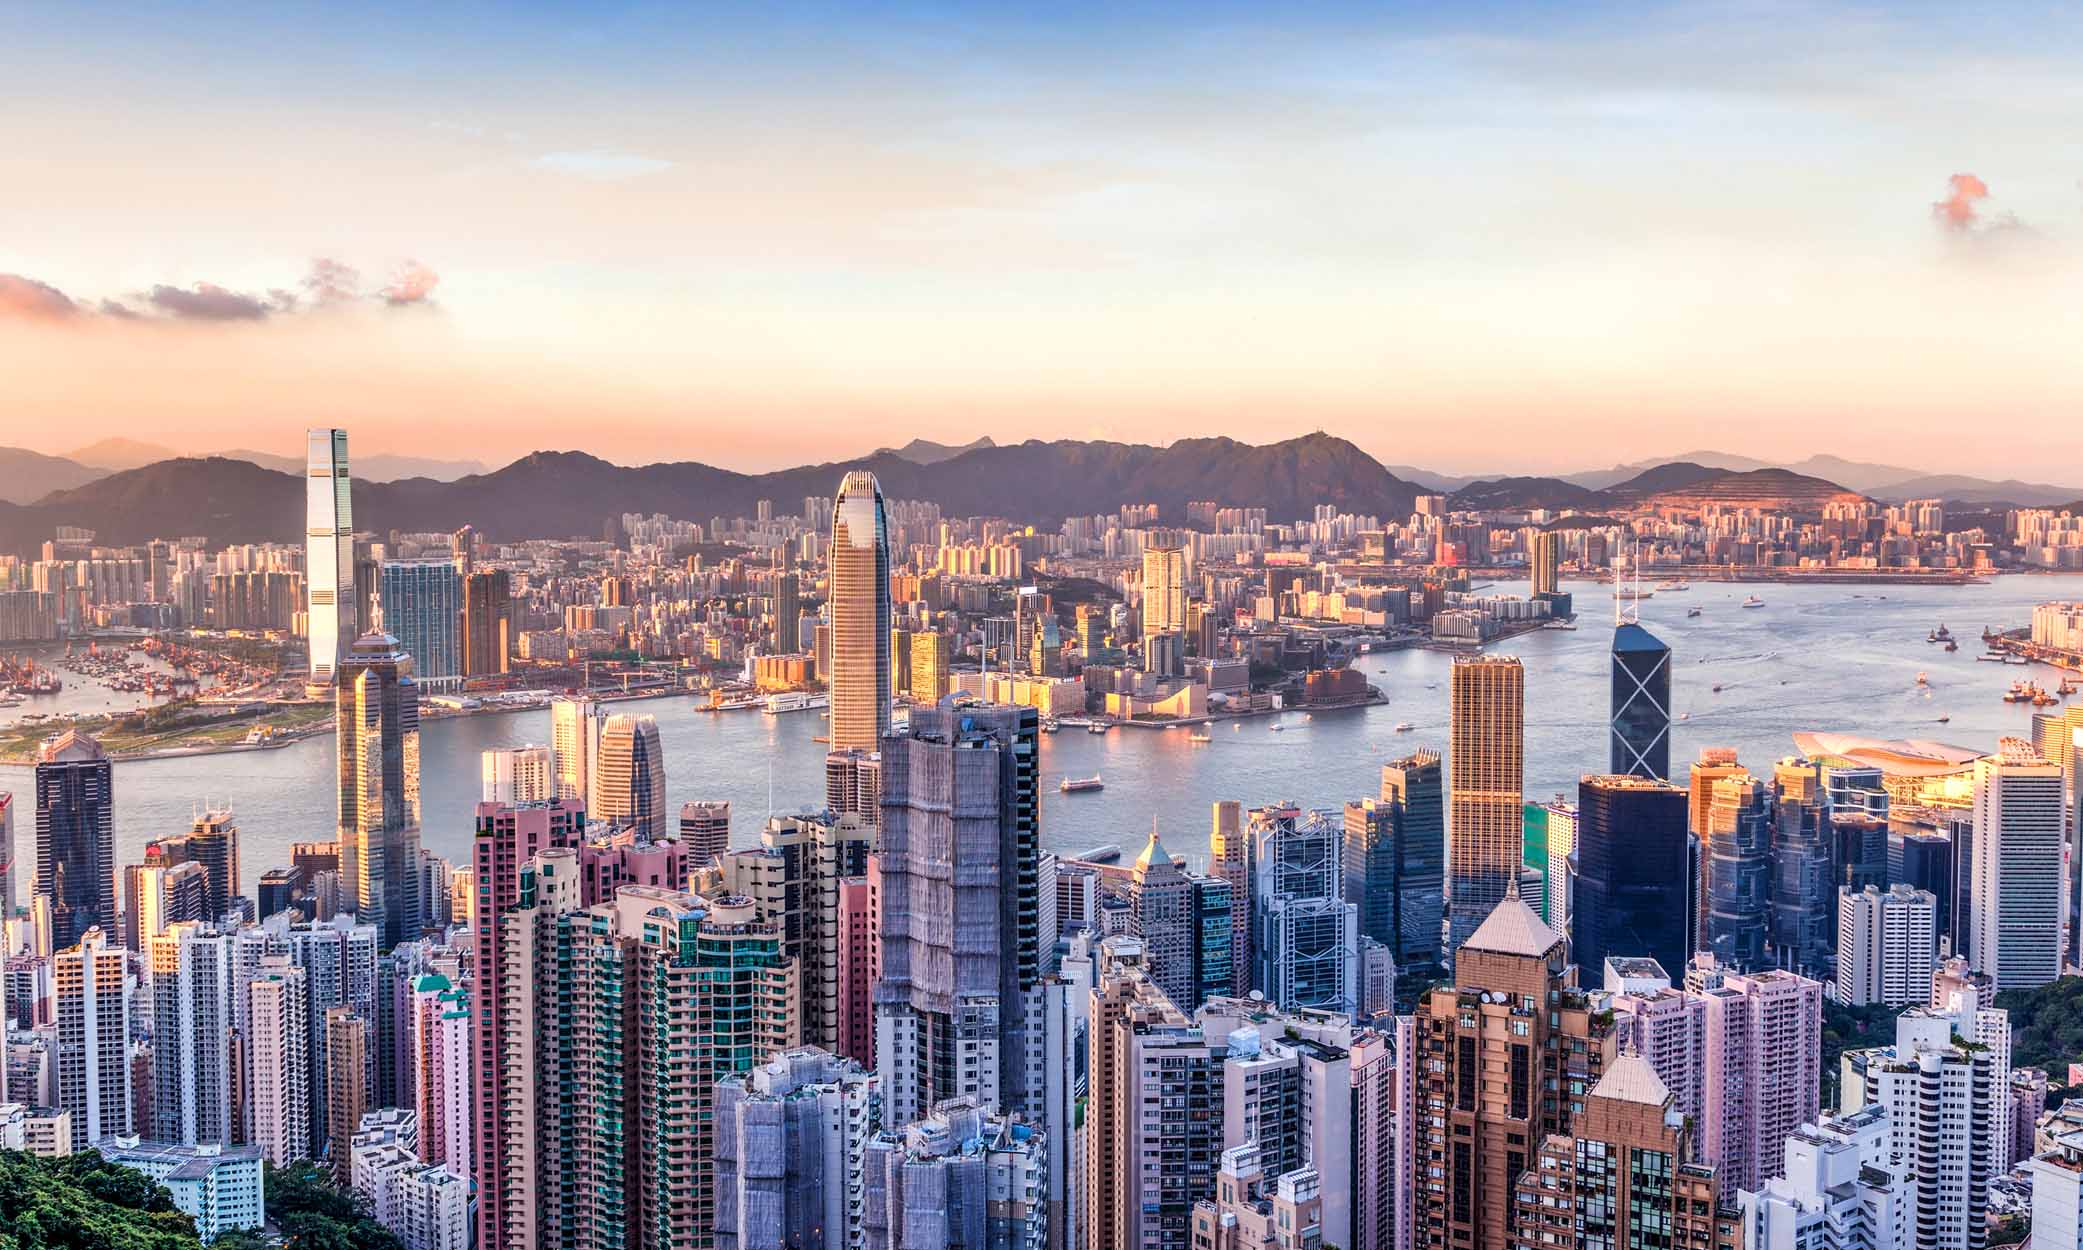 Learn about what’s happening in Hong Kong with Article 23.